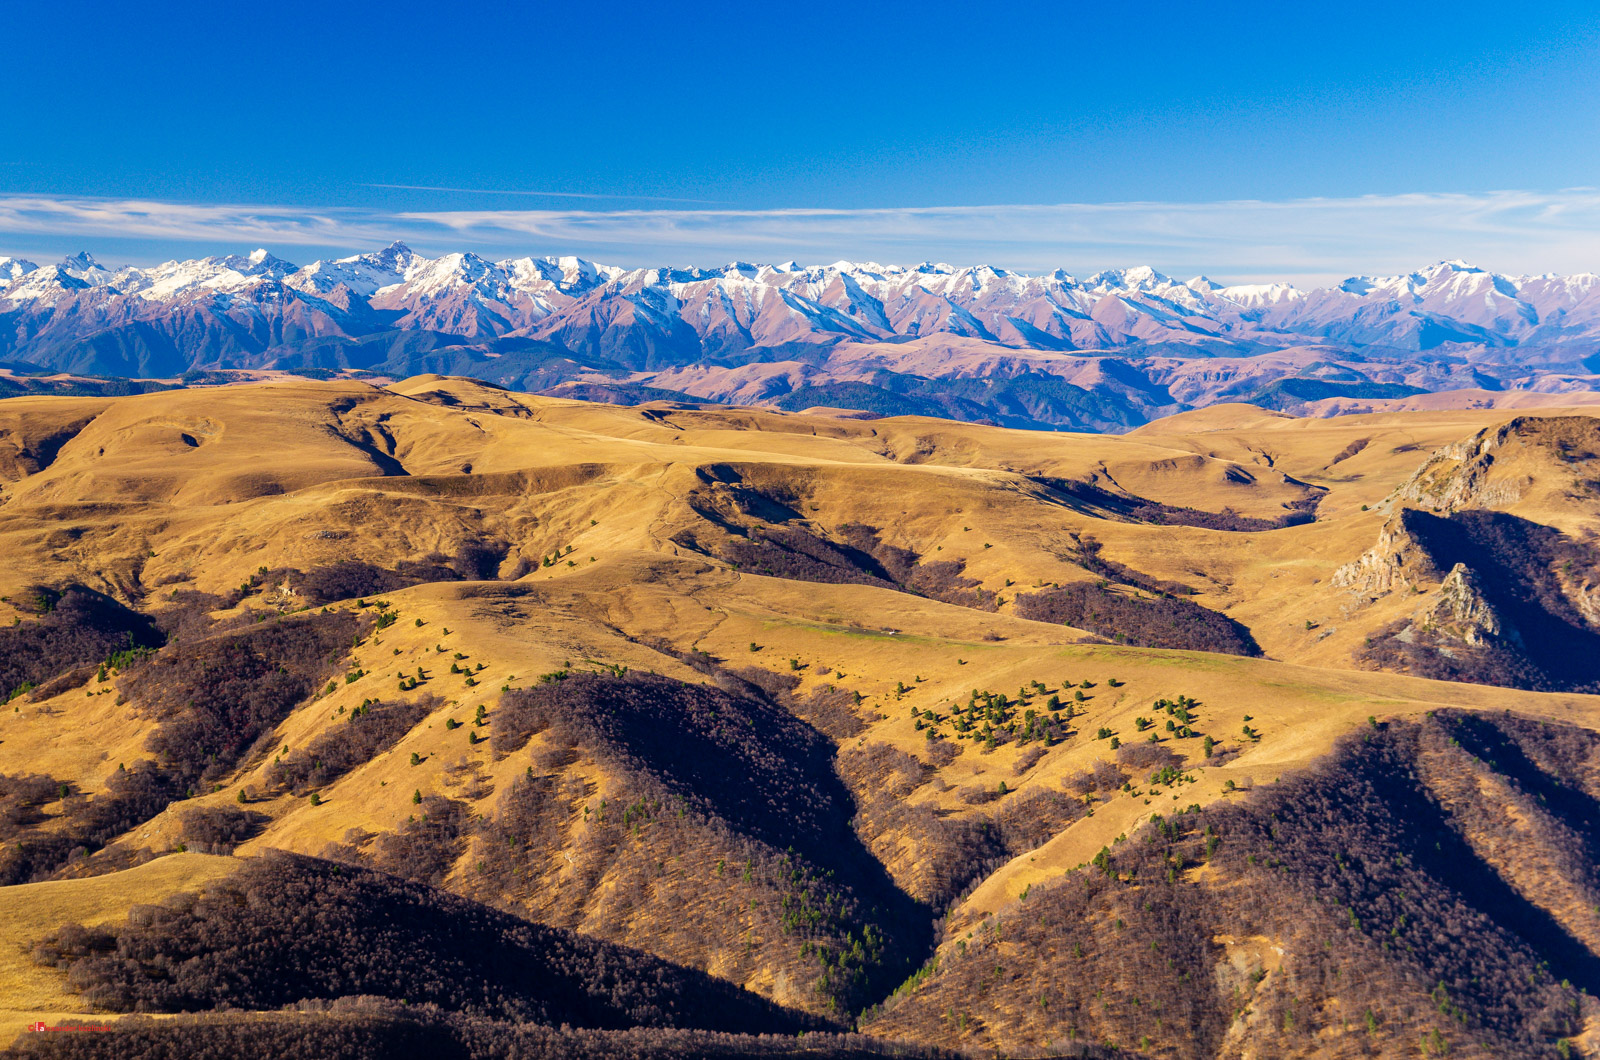 View of the Main Caucasus Range from the Bermamyt Plateau